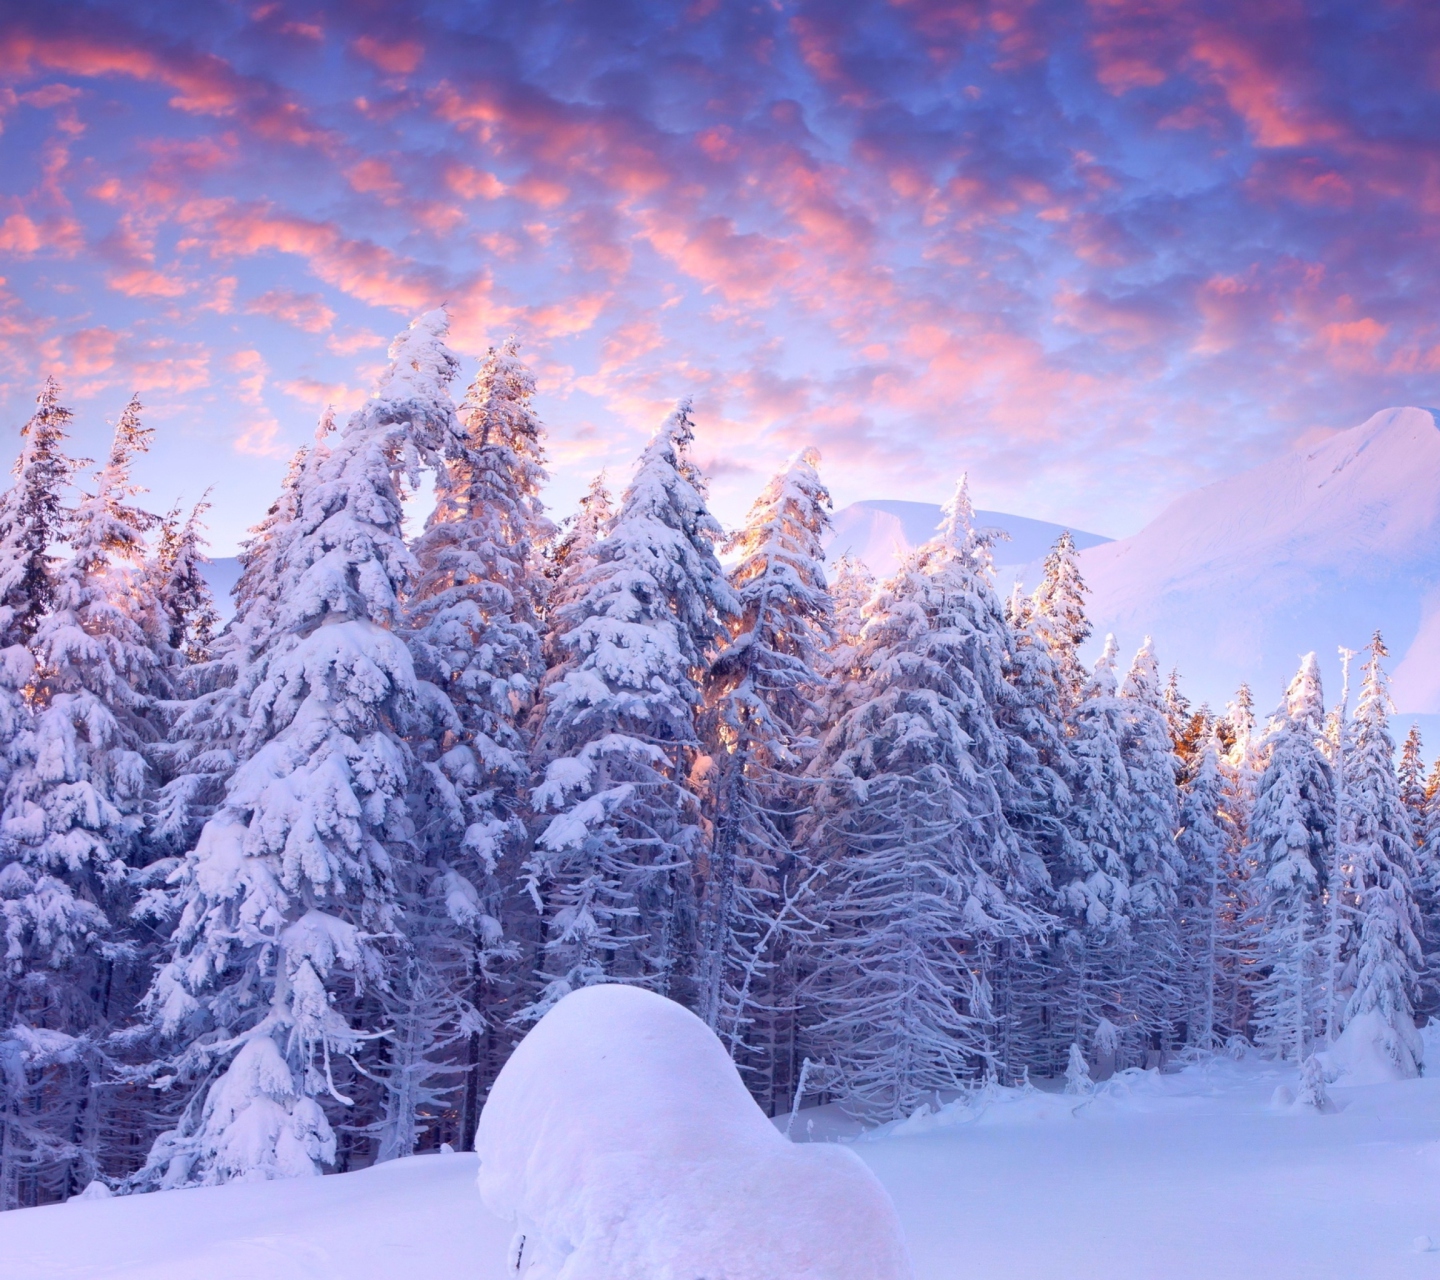 Snowy Christmas Trees In Forest wallpaper 1440x1280